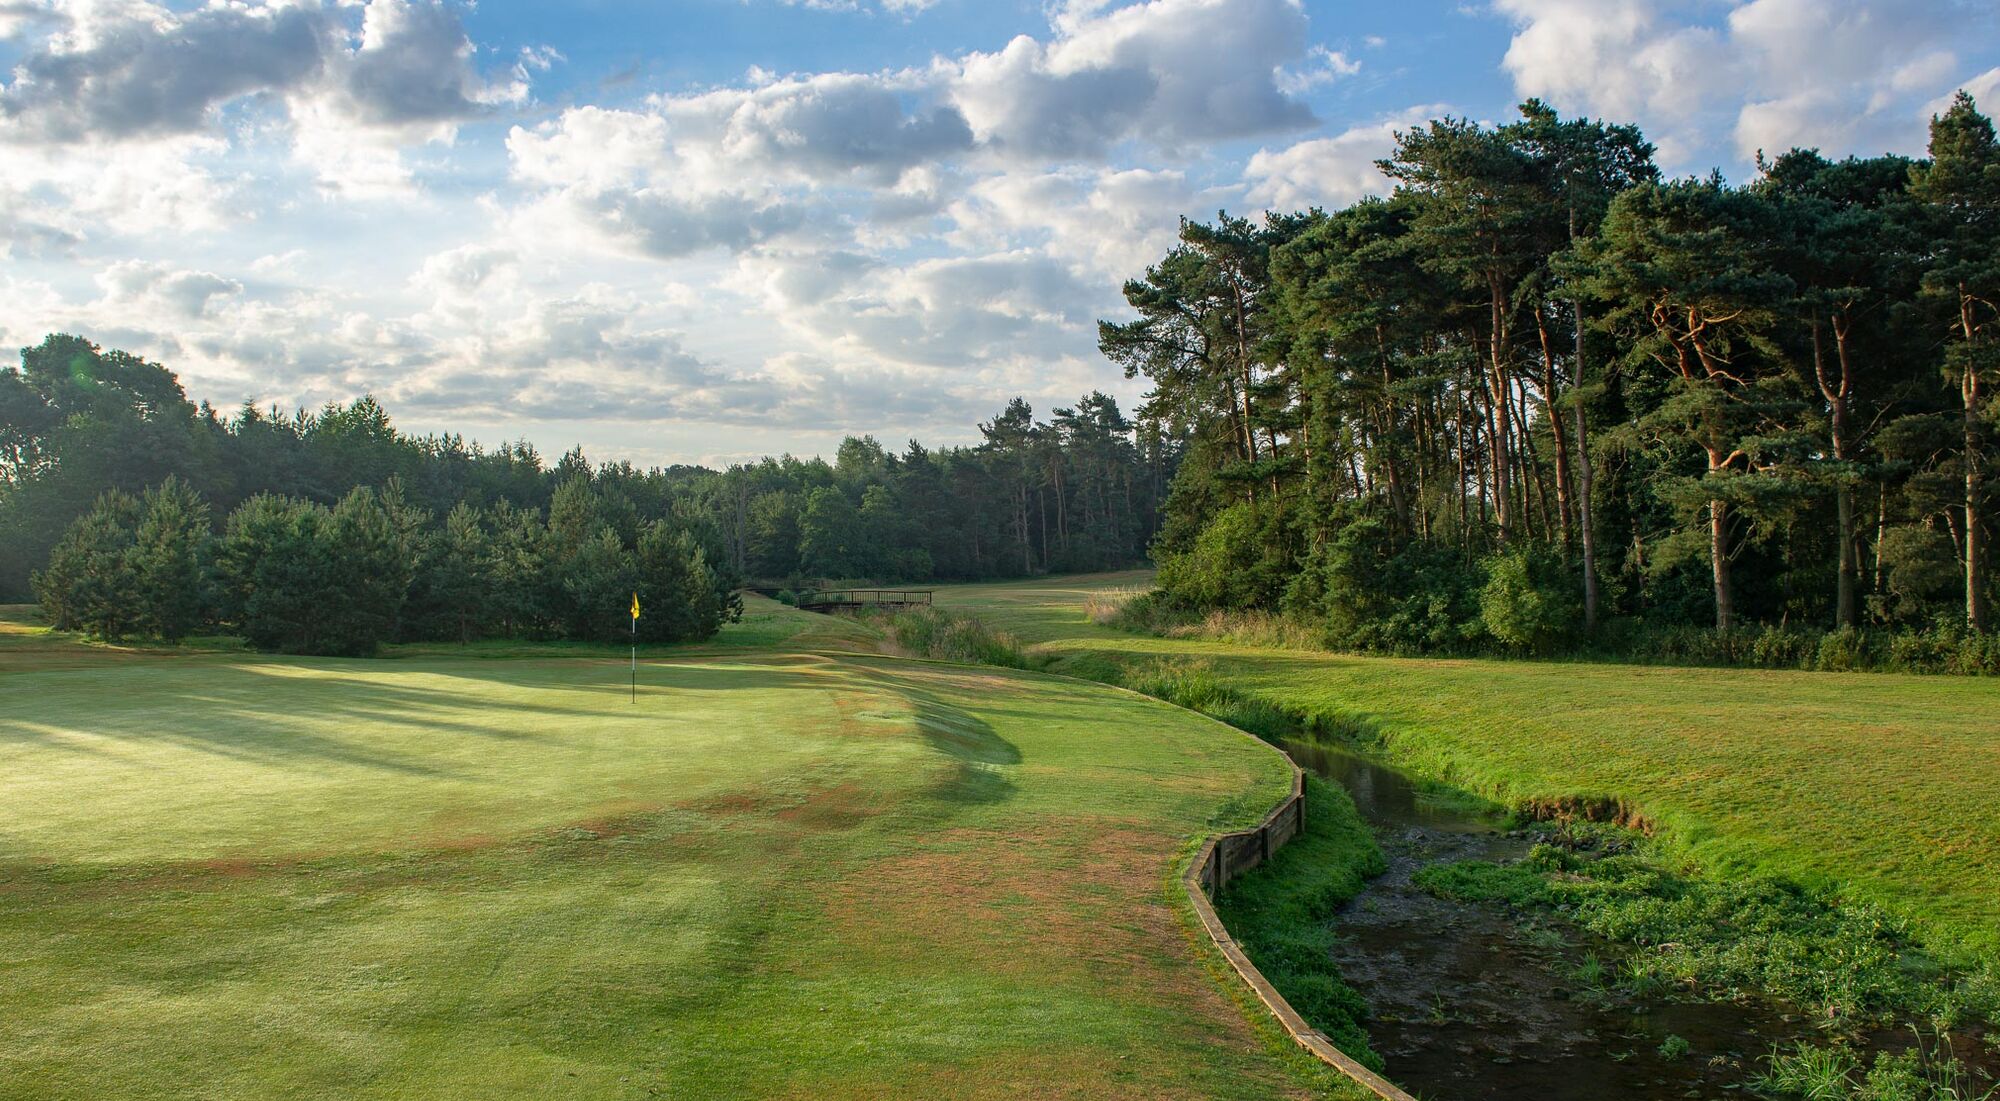 R&A Open Qualifying Venue ranked in the English Top 100 Courses